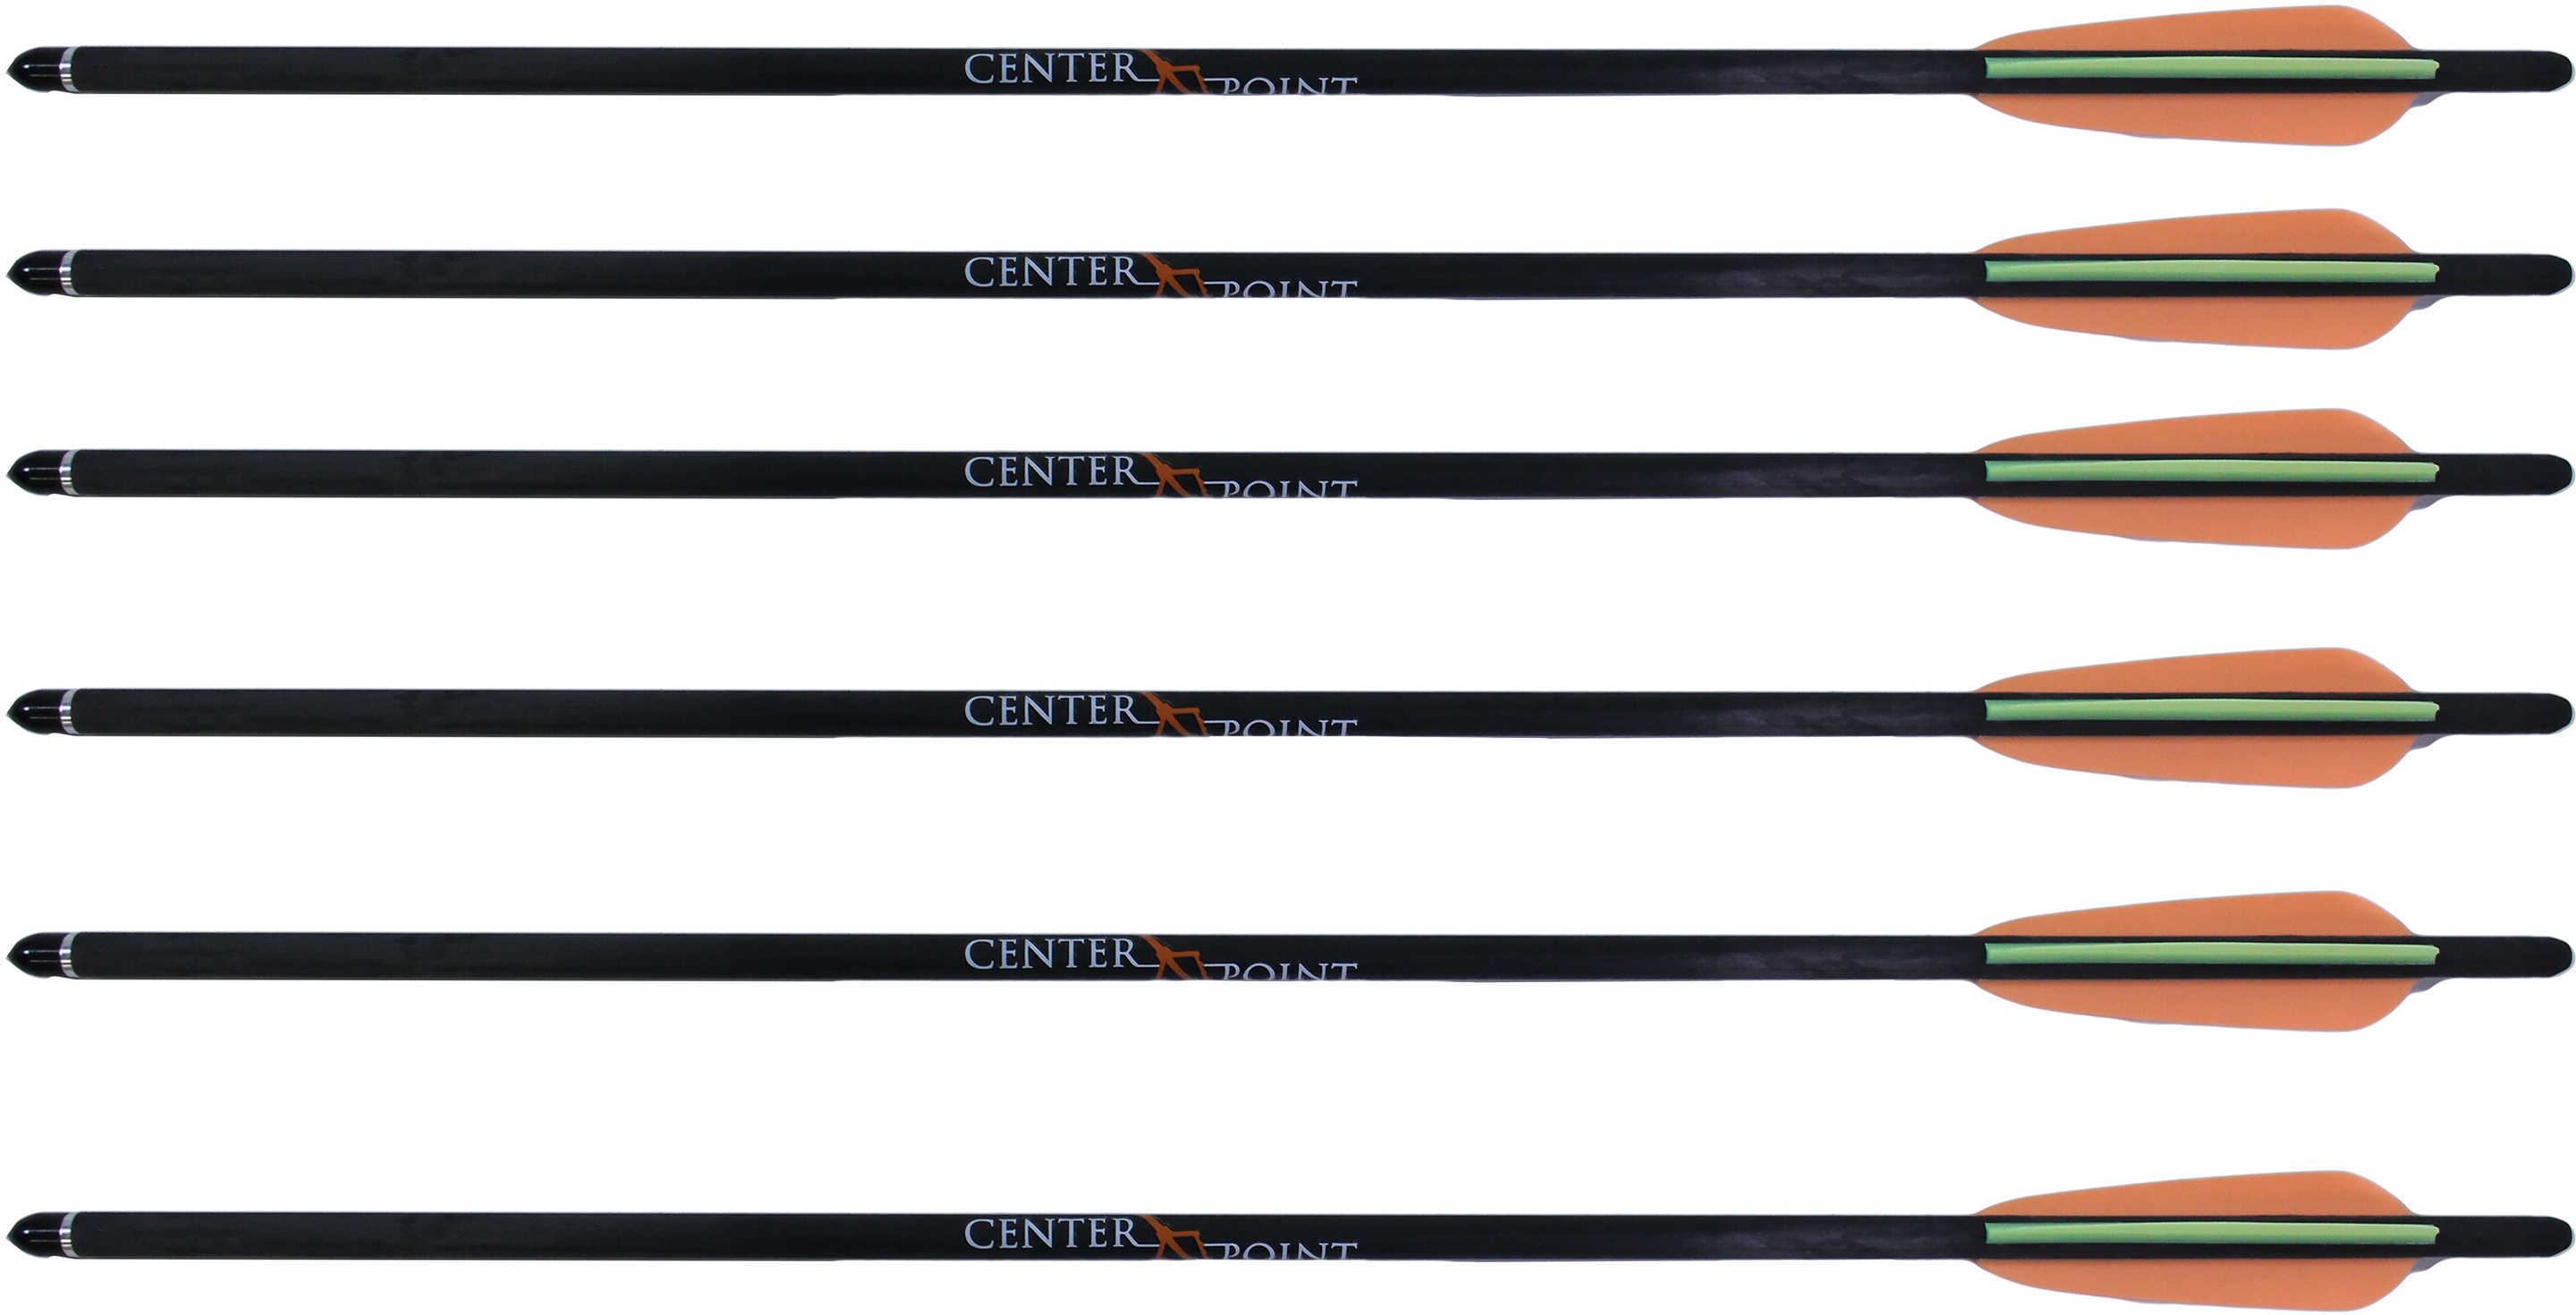 CenterPoint 20" Carbon Crossbow Arrows, Pack of 6 Md: AXCCA206PK